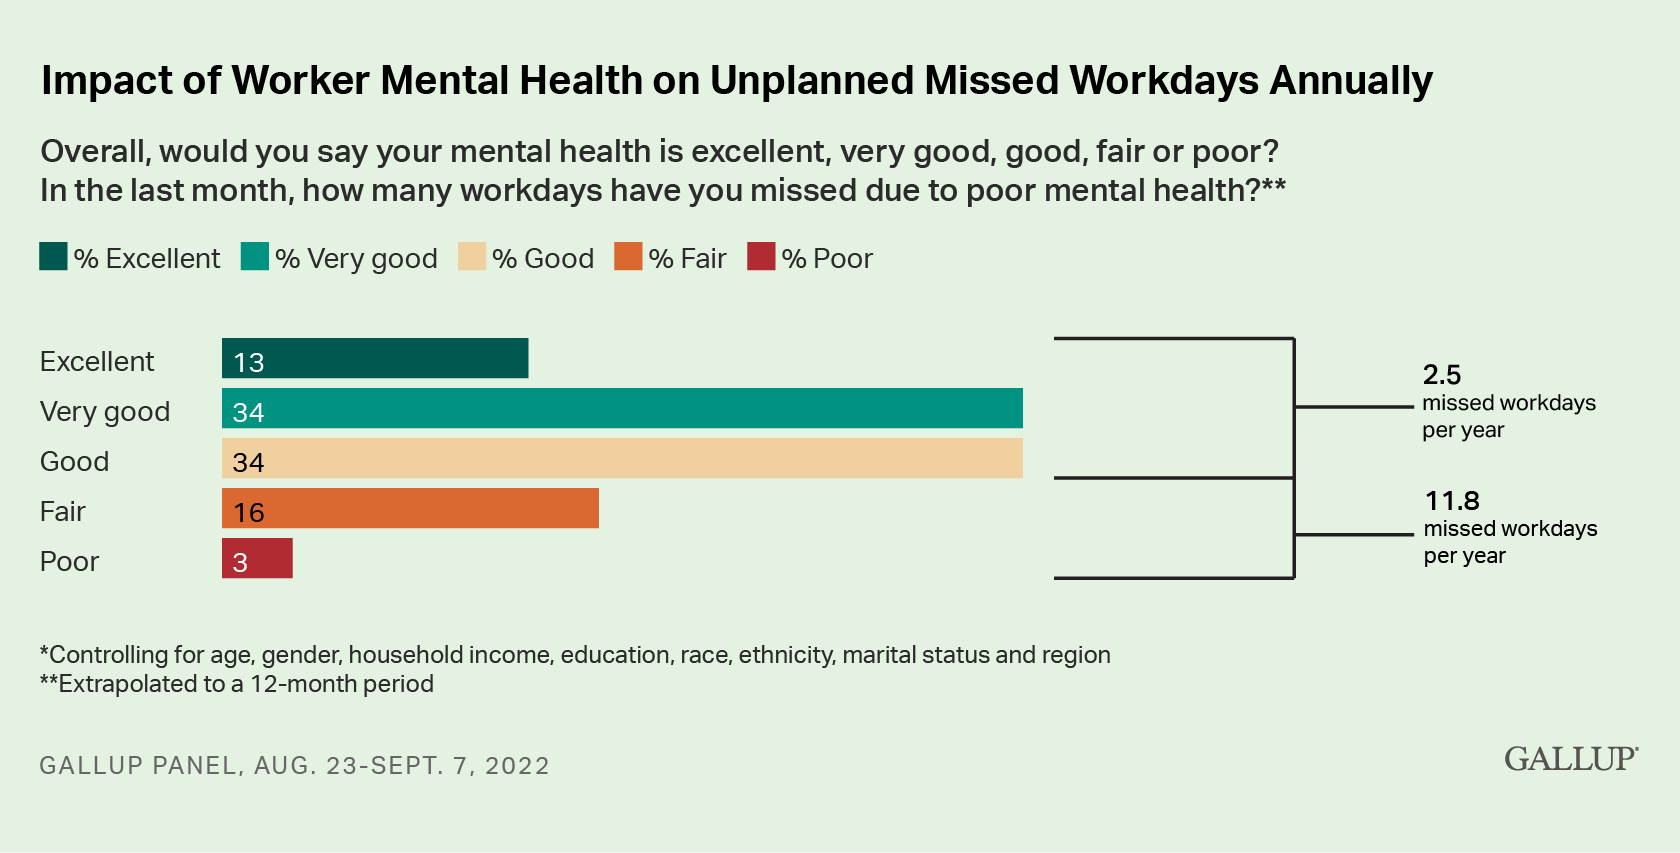 Impact of Worker Mental Health on Unplanned Missed Workdays Annually